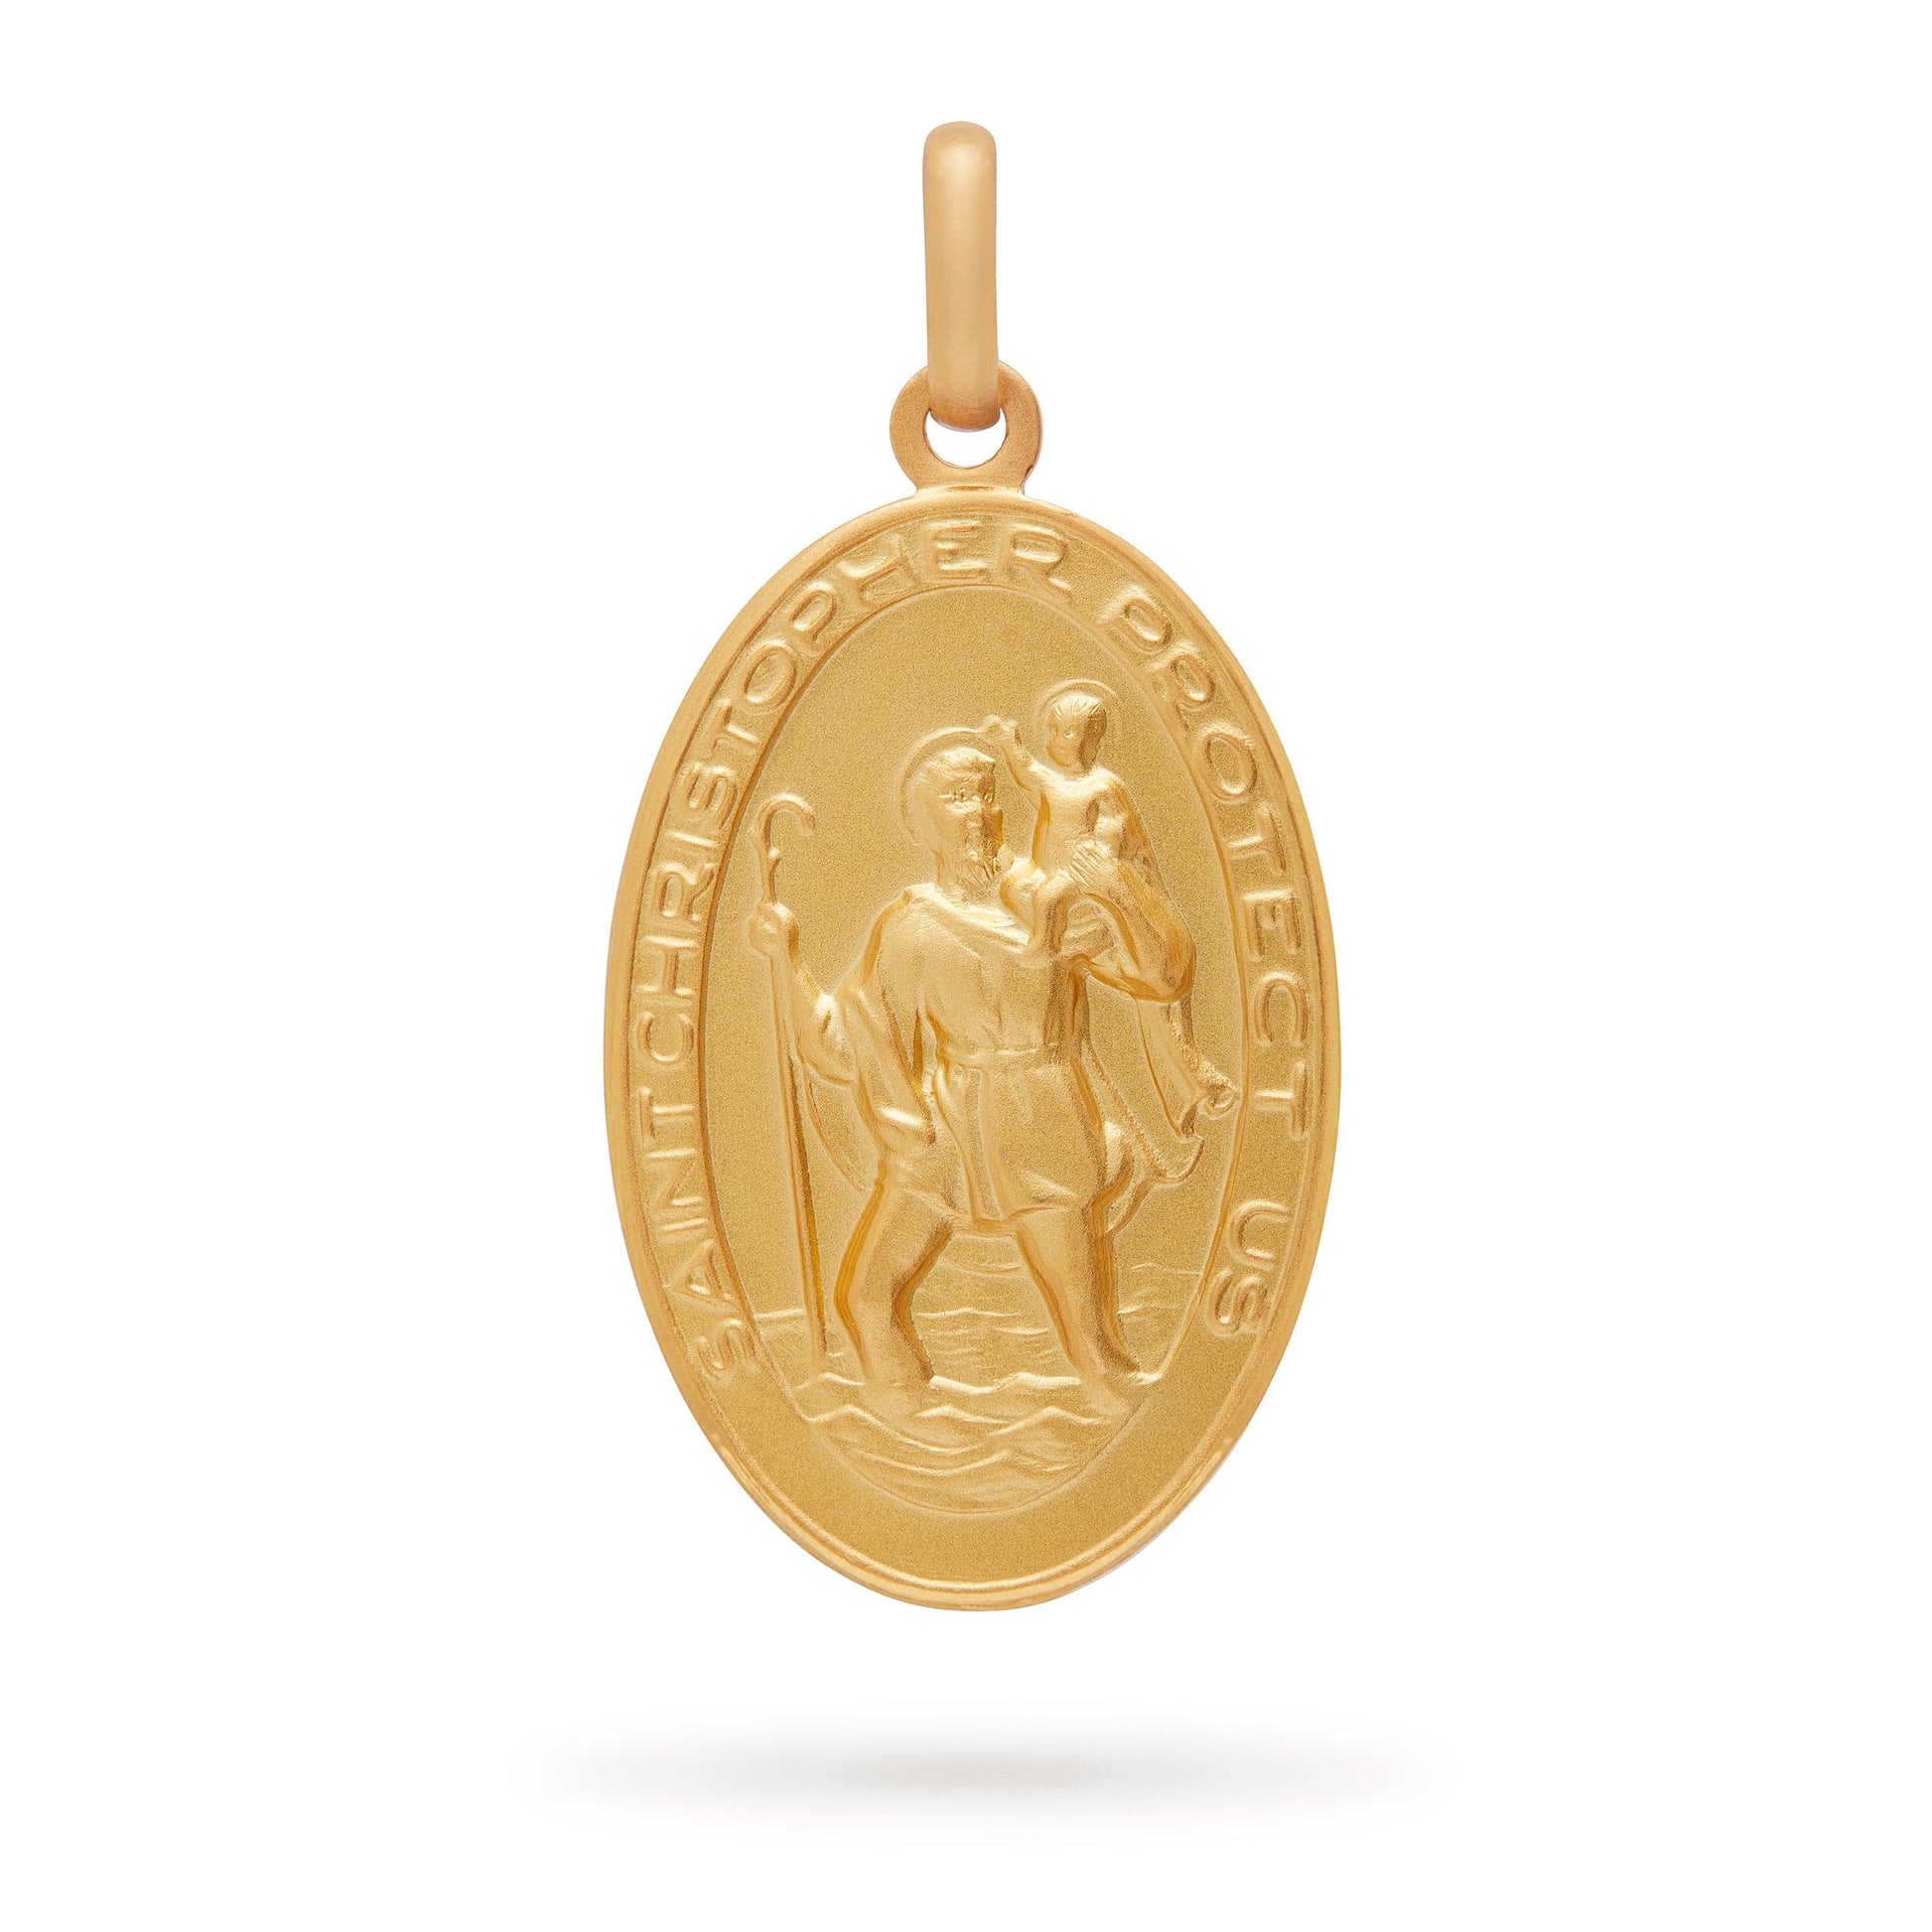 MONDO CATTOLICO Jewelry 20 mm (0.78 in) Yellow Gold Oval Medal of Saint Christopher